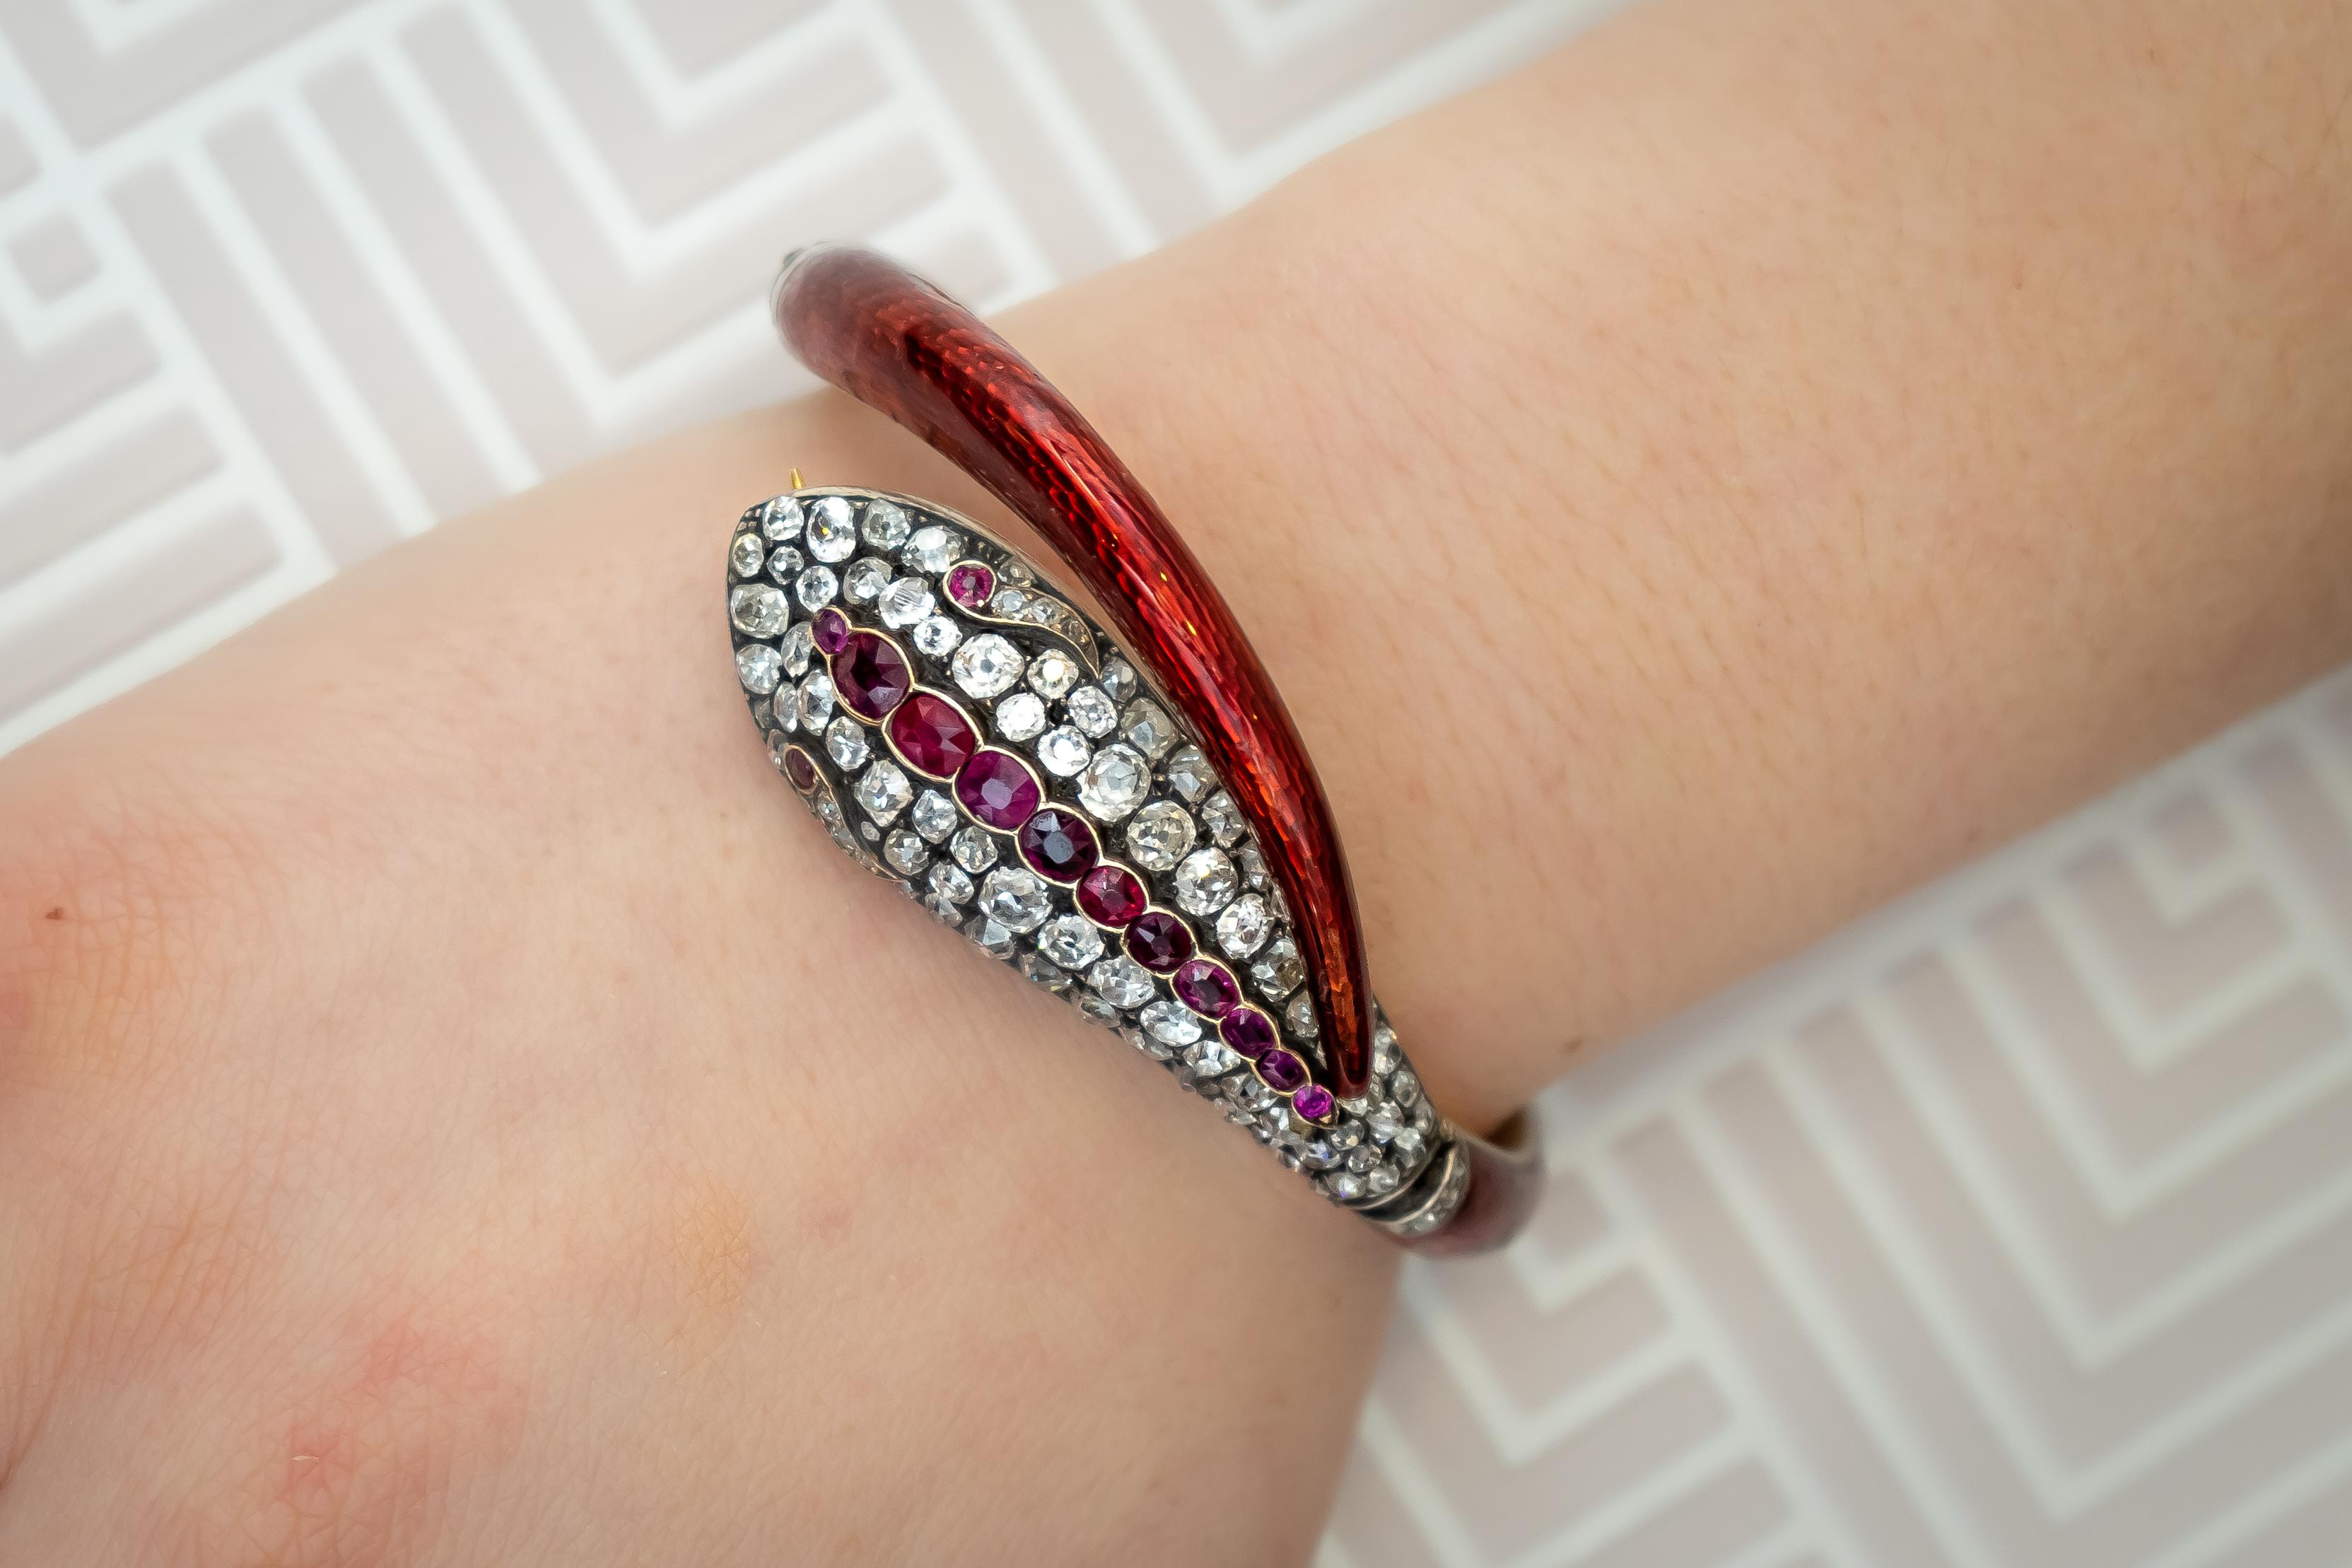 A Victorian red guilloche enamel snake bangle, the head is set with old-cut diamonds and mixed-cut rubies, with a red guilloche enamelled body and tail, with diamond details on the three hinges, circa 1860.